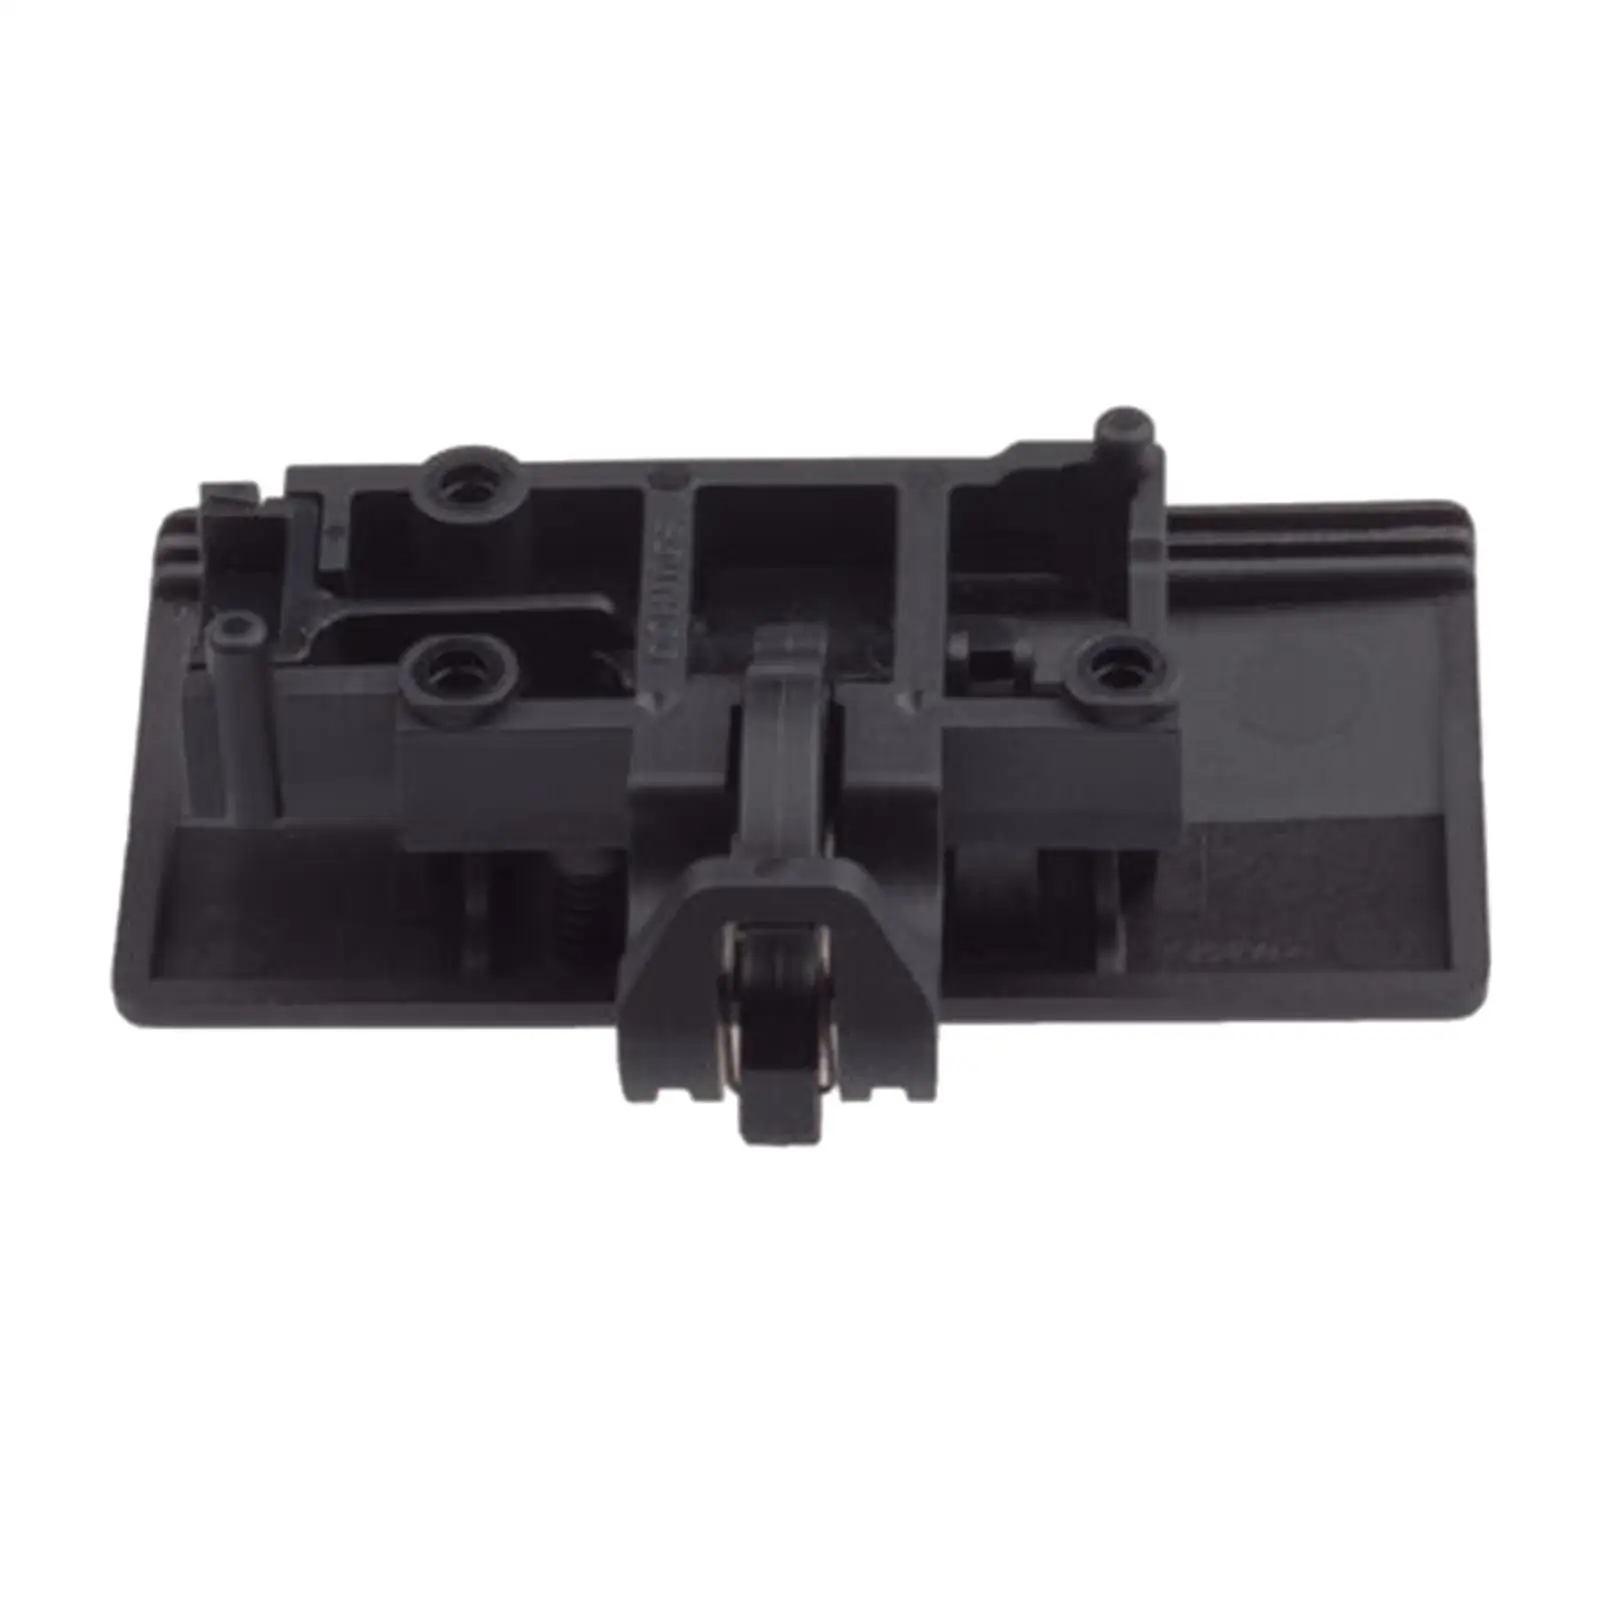 Glove Box Door Latch Lock Parts Replacement Premium for Ford F150 F250